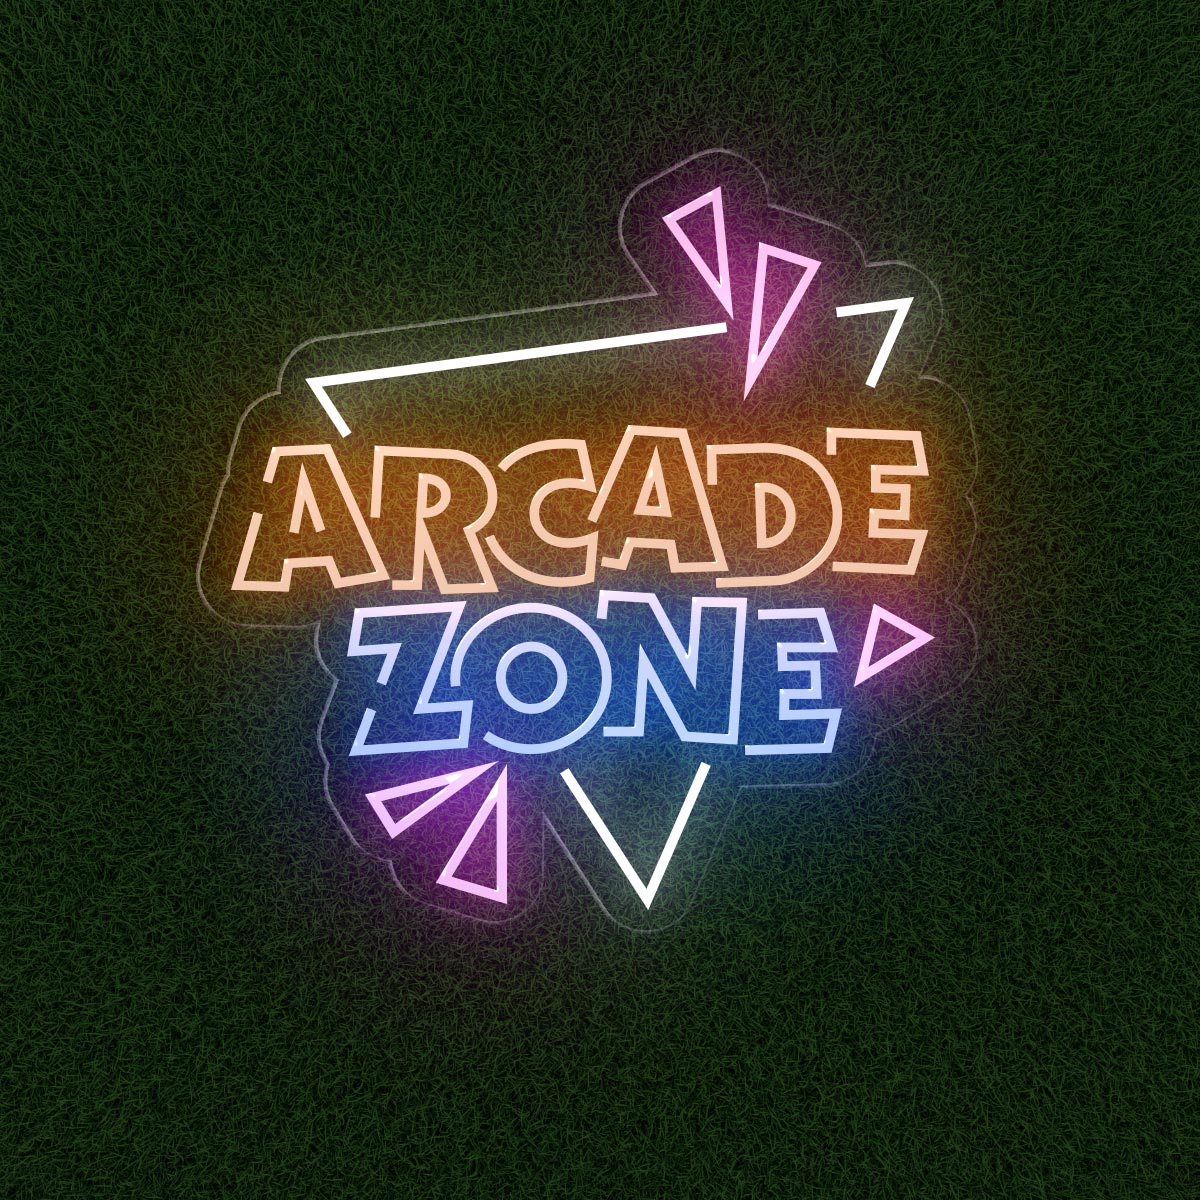 Arcade Zone Neon Sign for Game Rooms and Decor - NEONXPERT